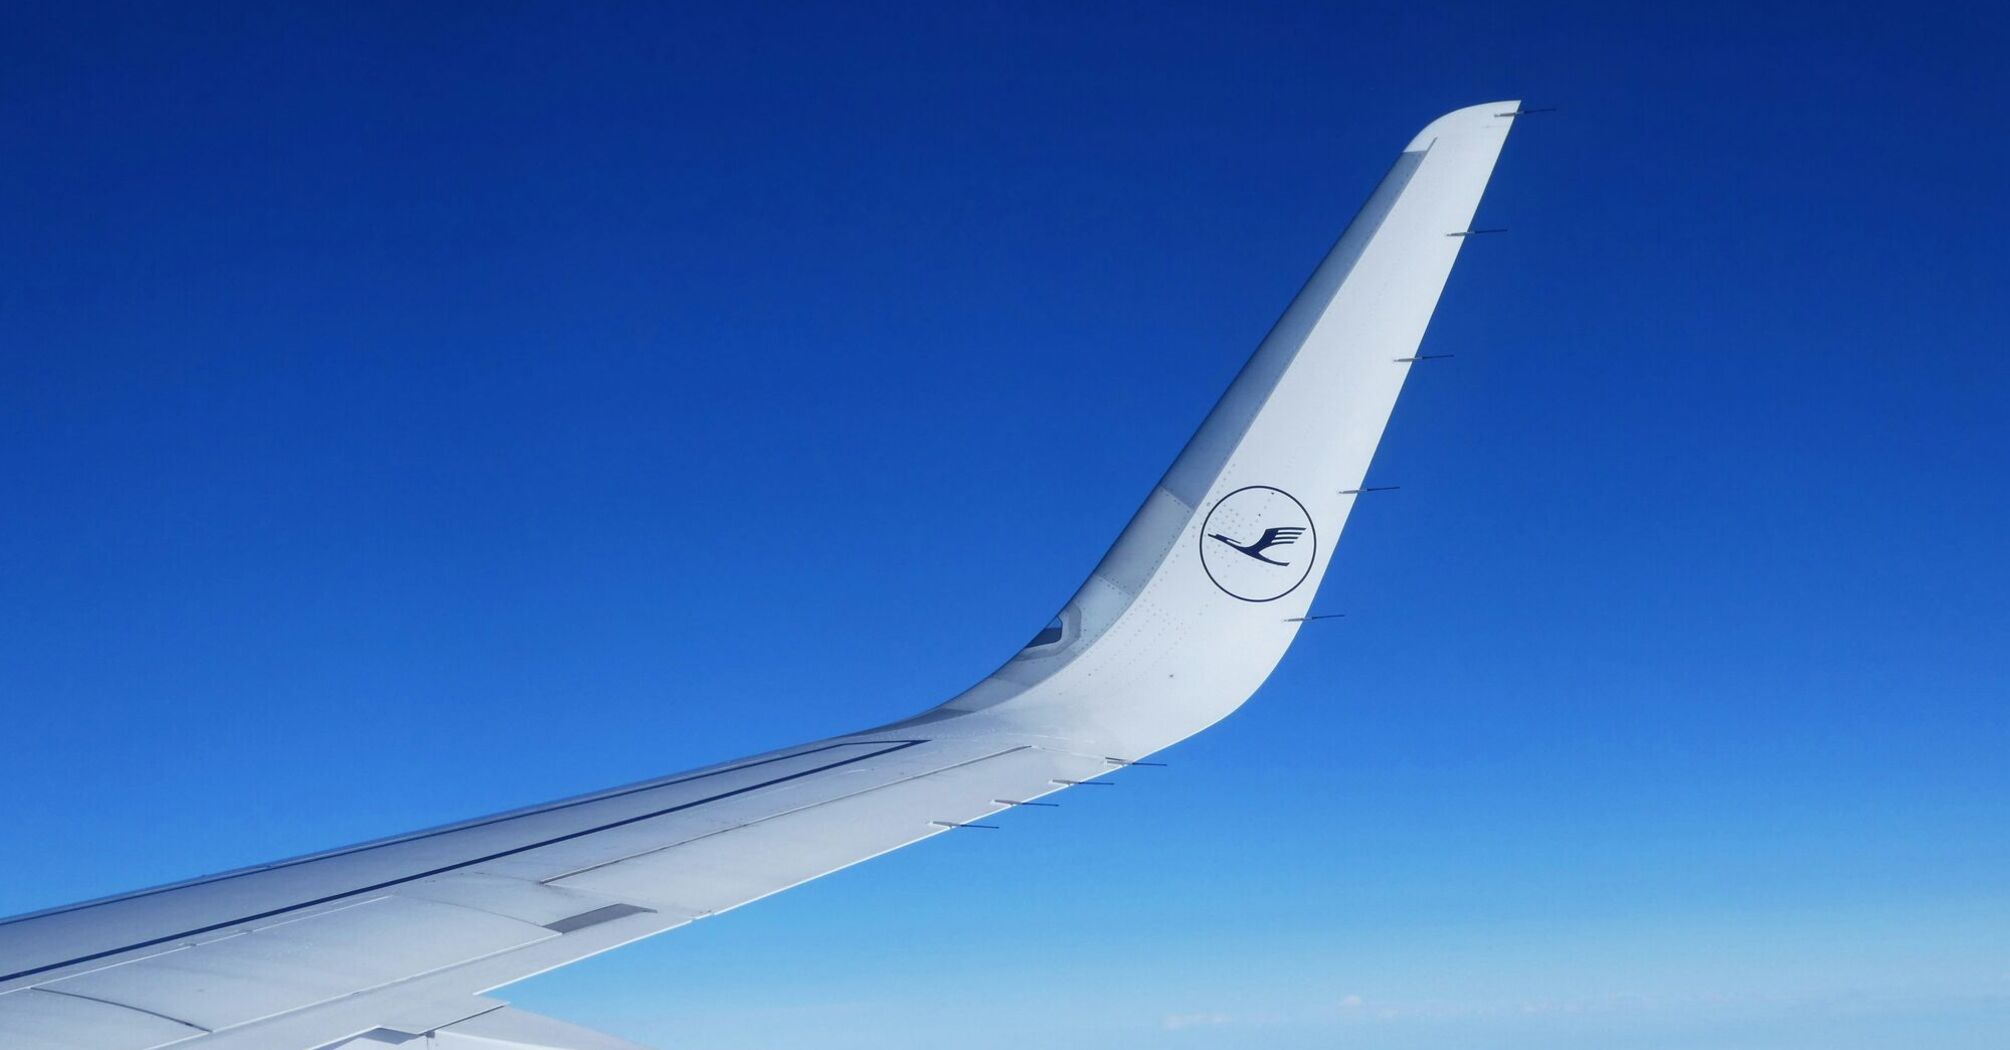 Wingtip of a Lufthansa airplane with the company's logo against a clear blue sky